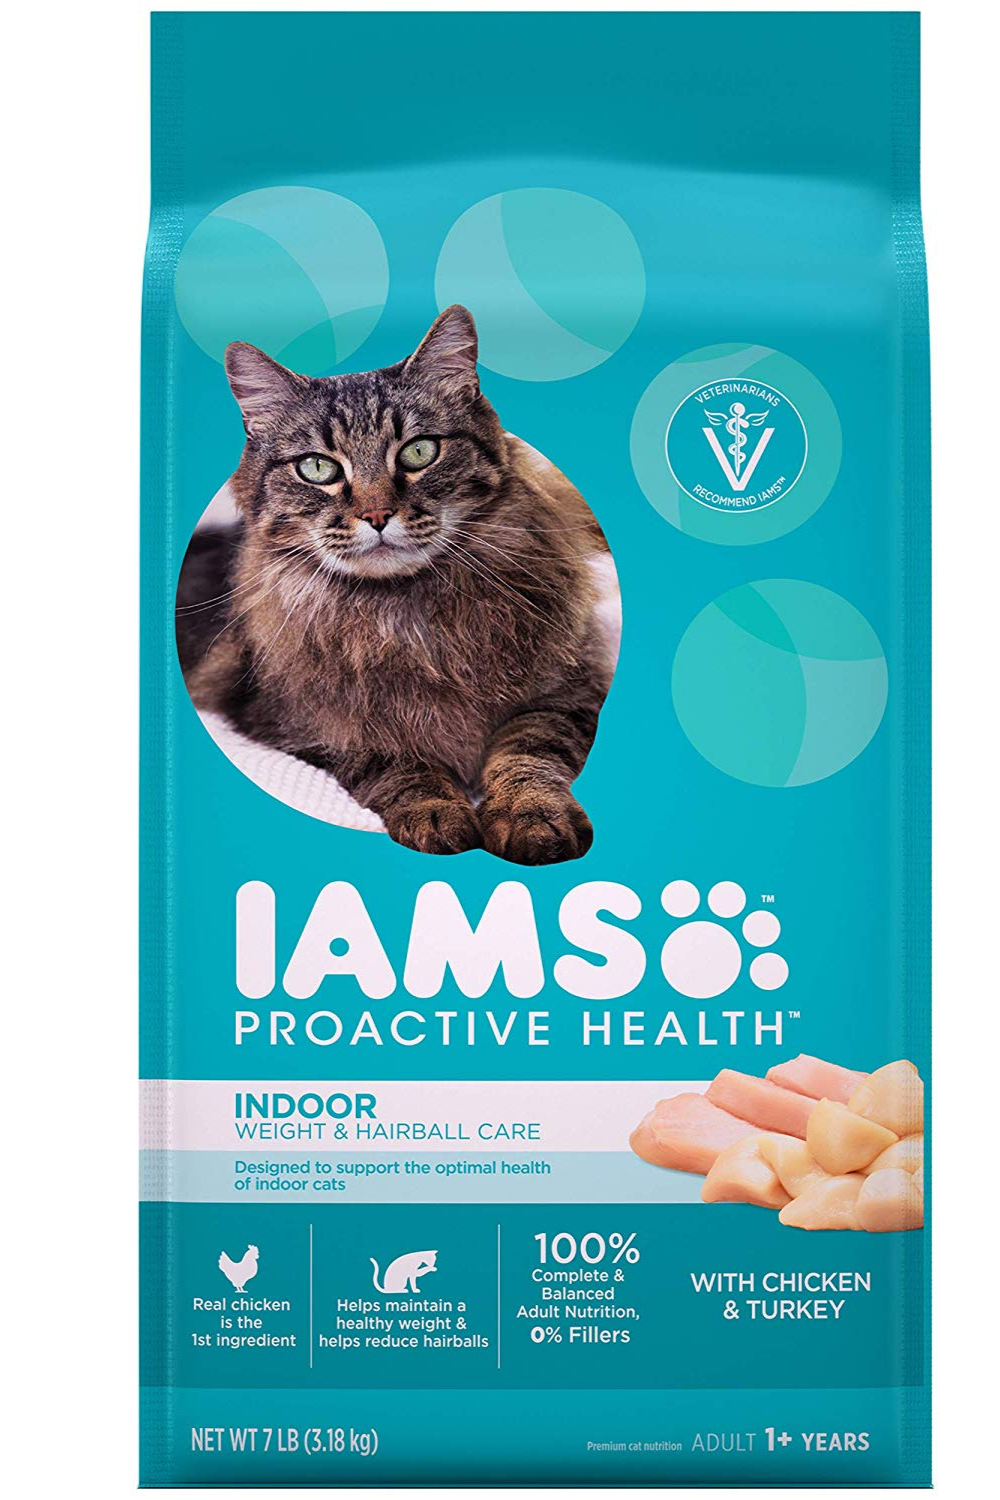 Pin on Best Cat Food Brands Products